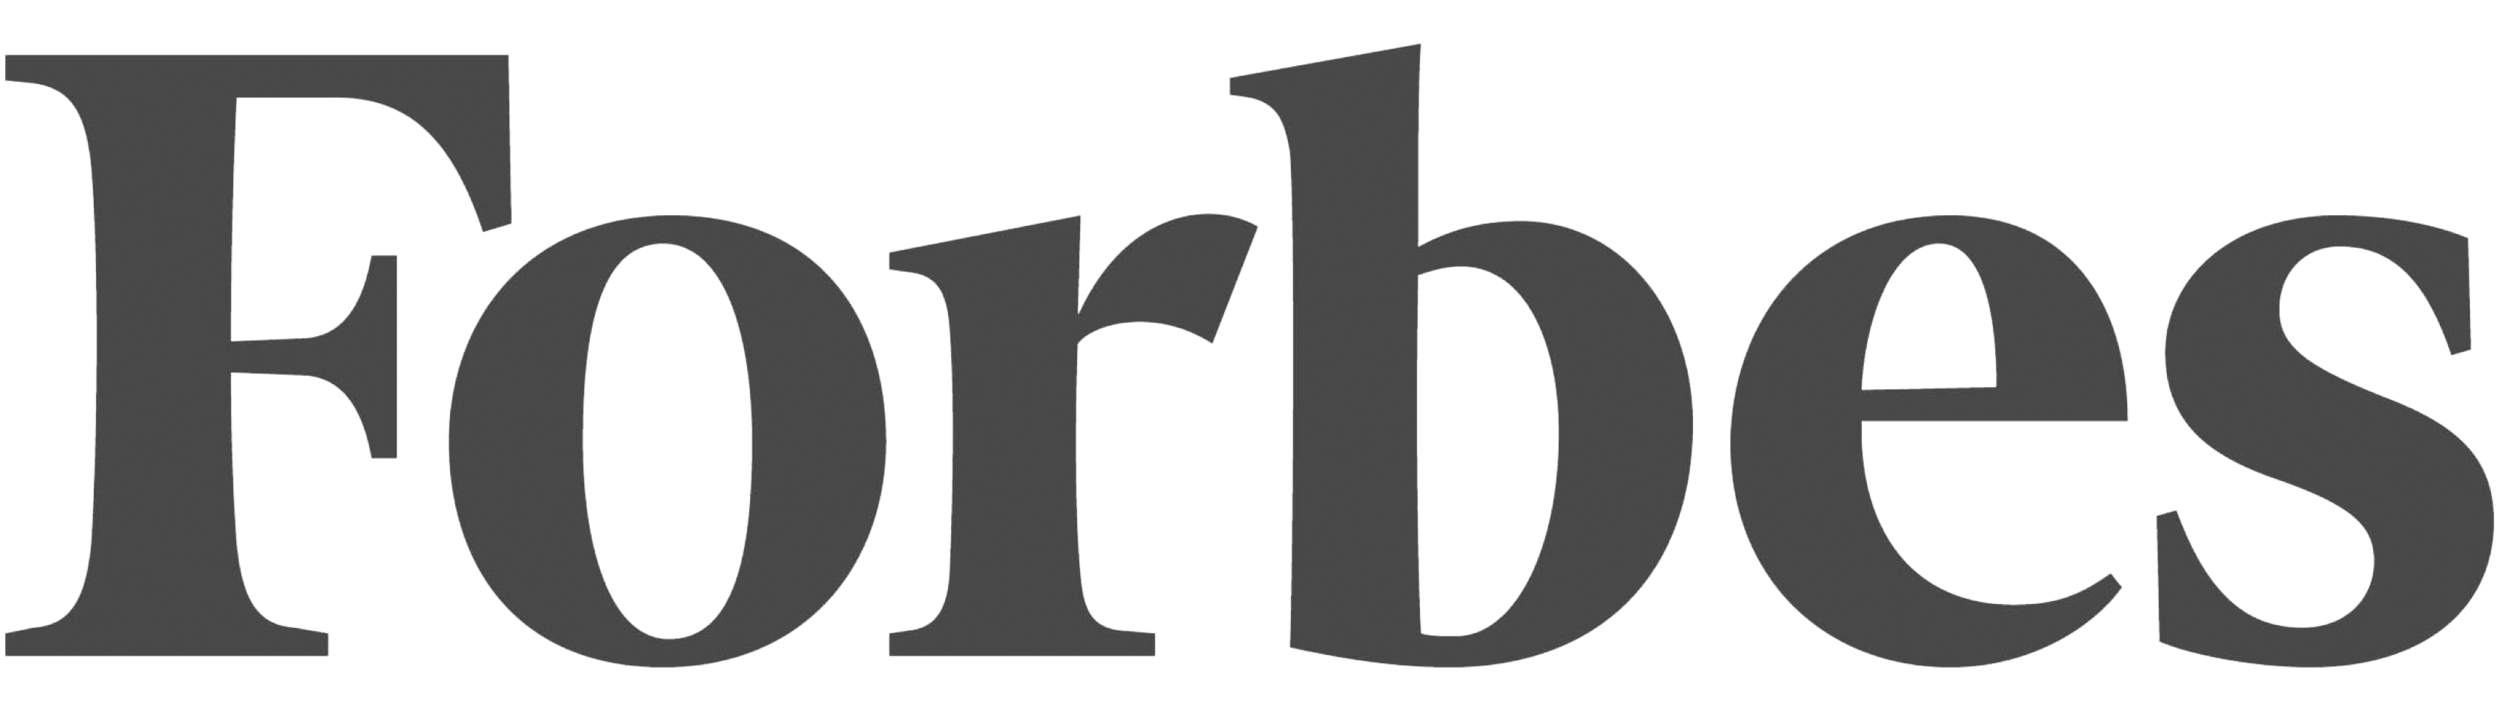 FORBES-LOGO-2.png